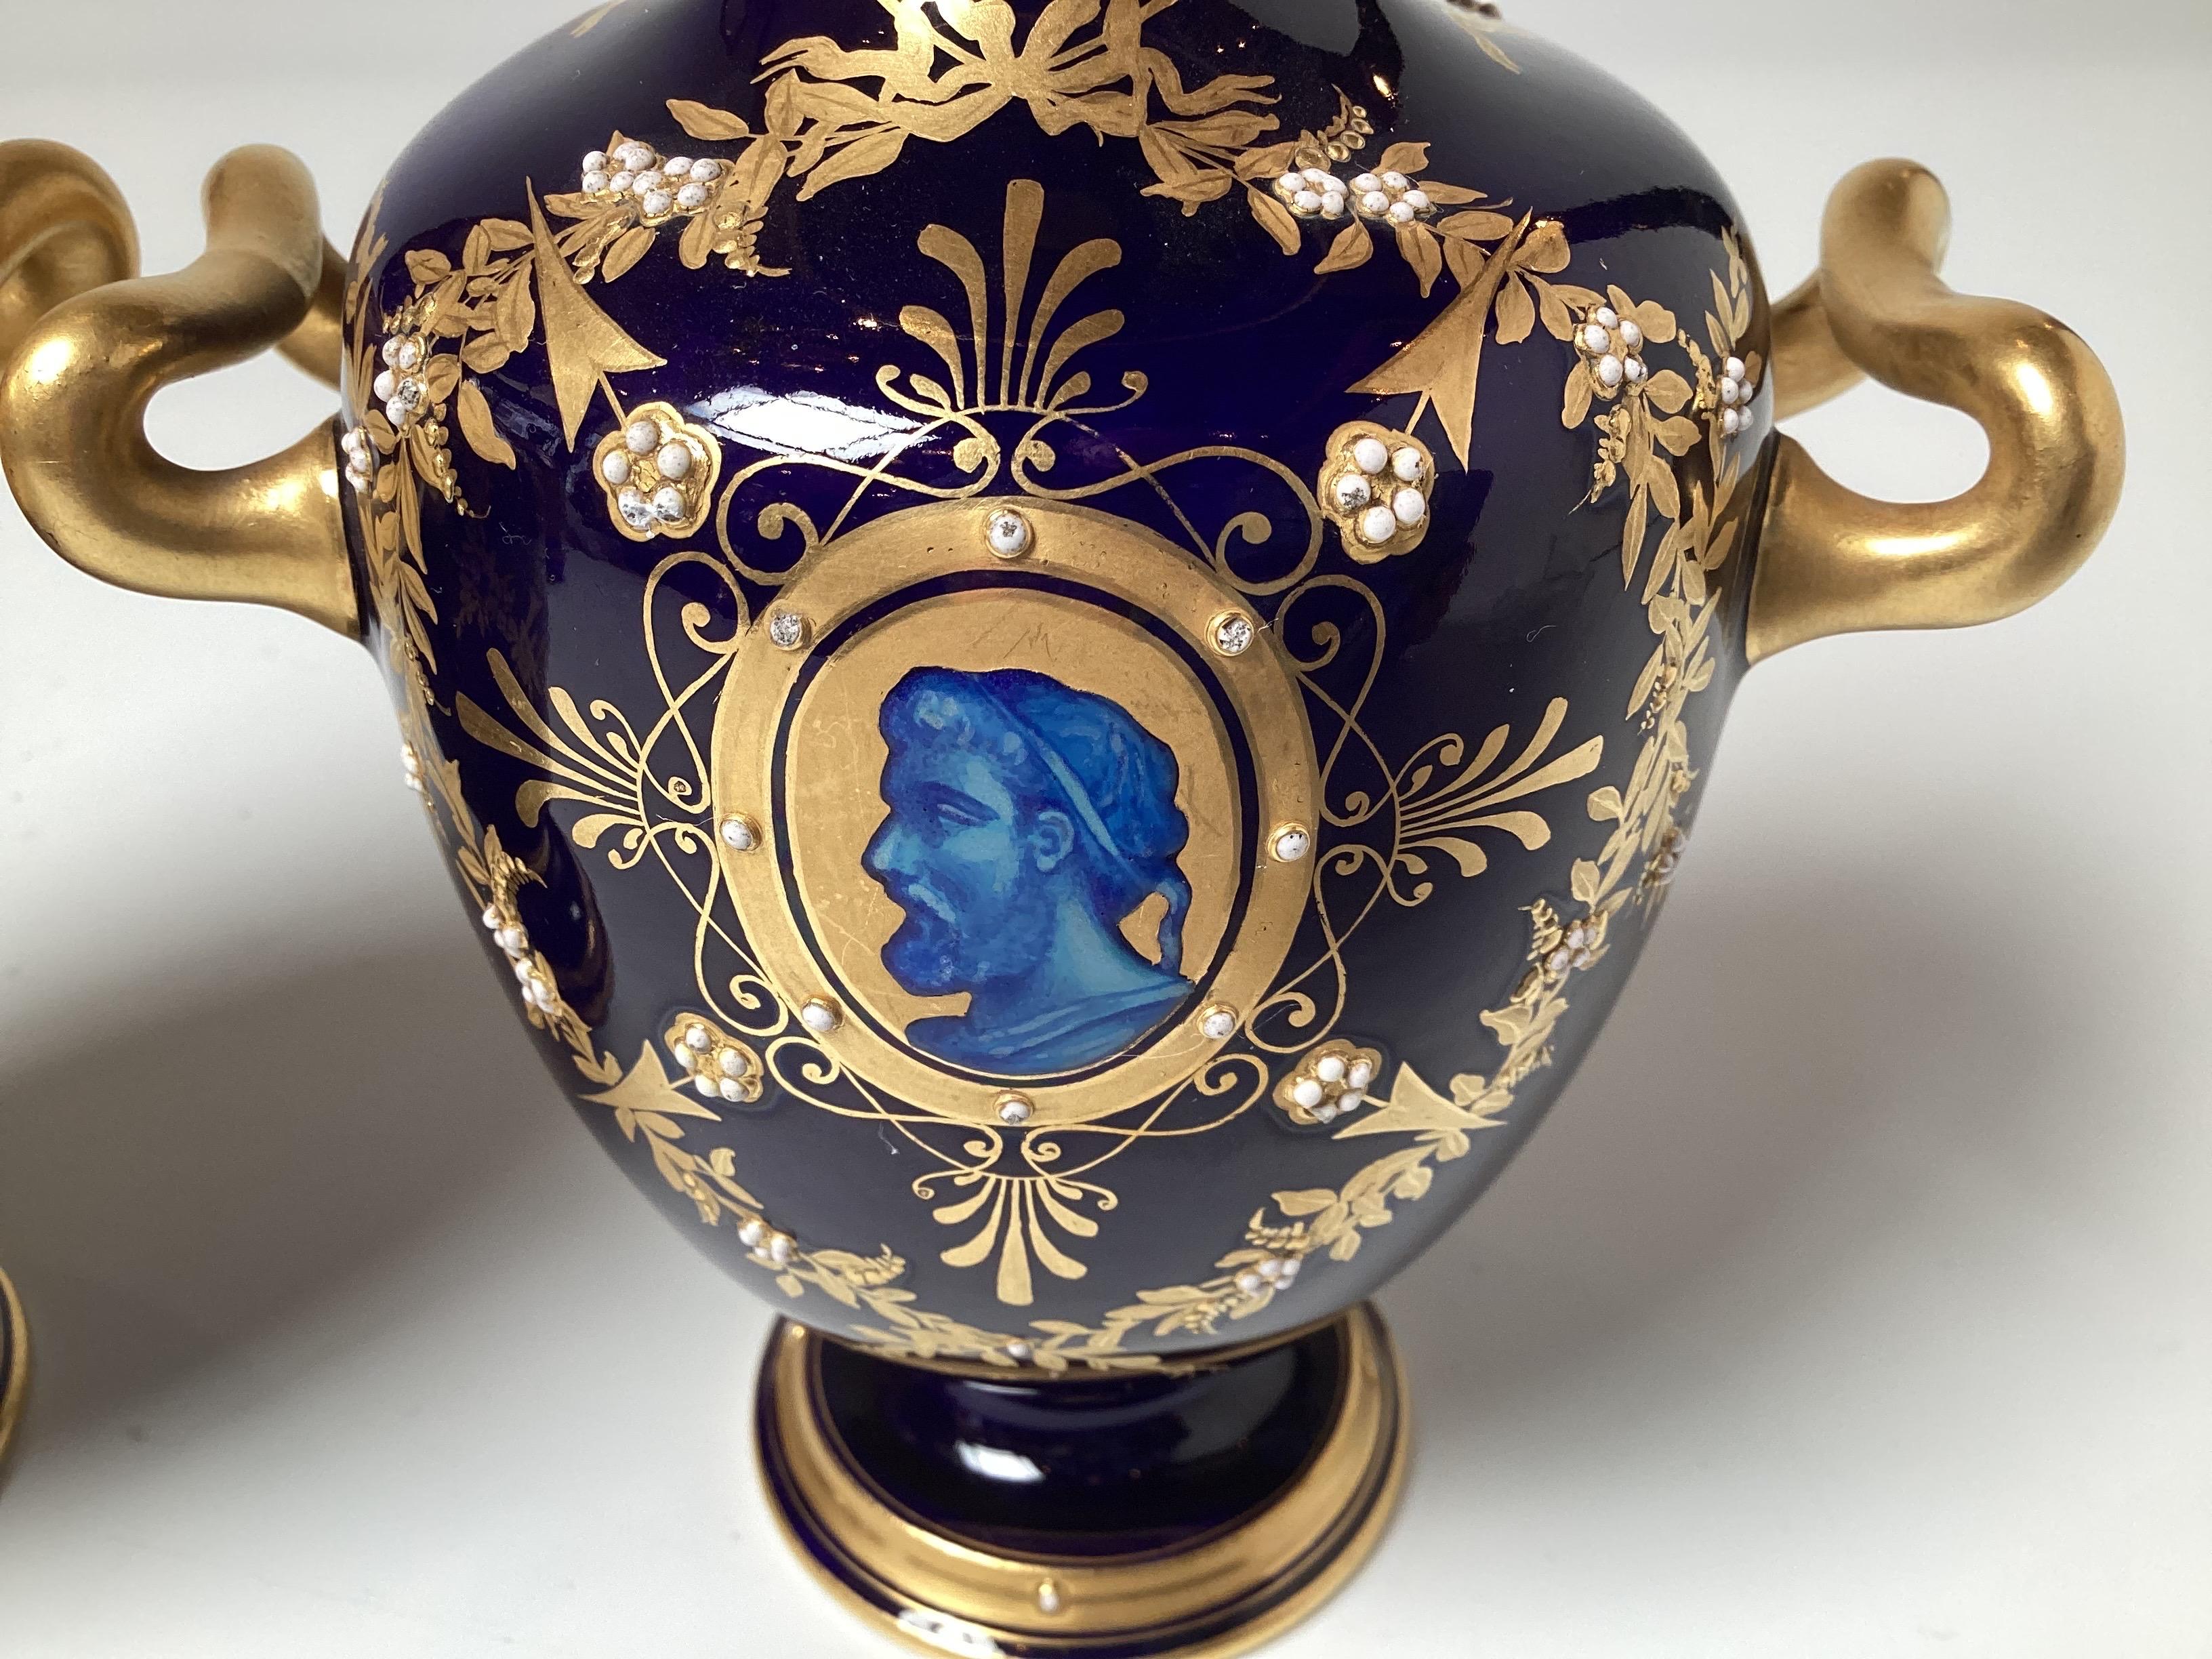 Classic pair of mid 19th Century Cobalt blue and gold portrait cabinet vases. The deep cobalt blue background with azure blue portrait profiles with hand gilt decoration. The gilt work with white beaded flower accents. 6.5 inches tall, attributed to